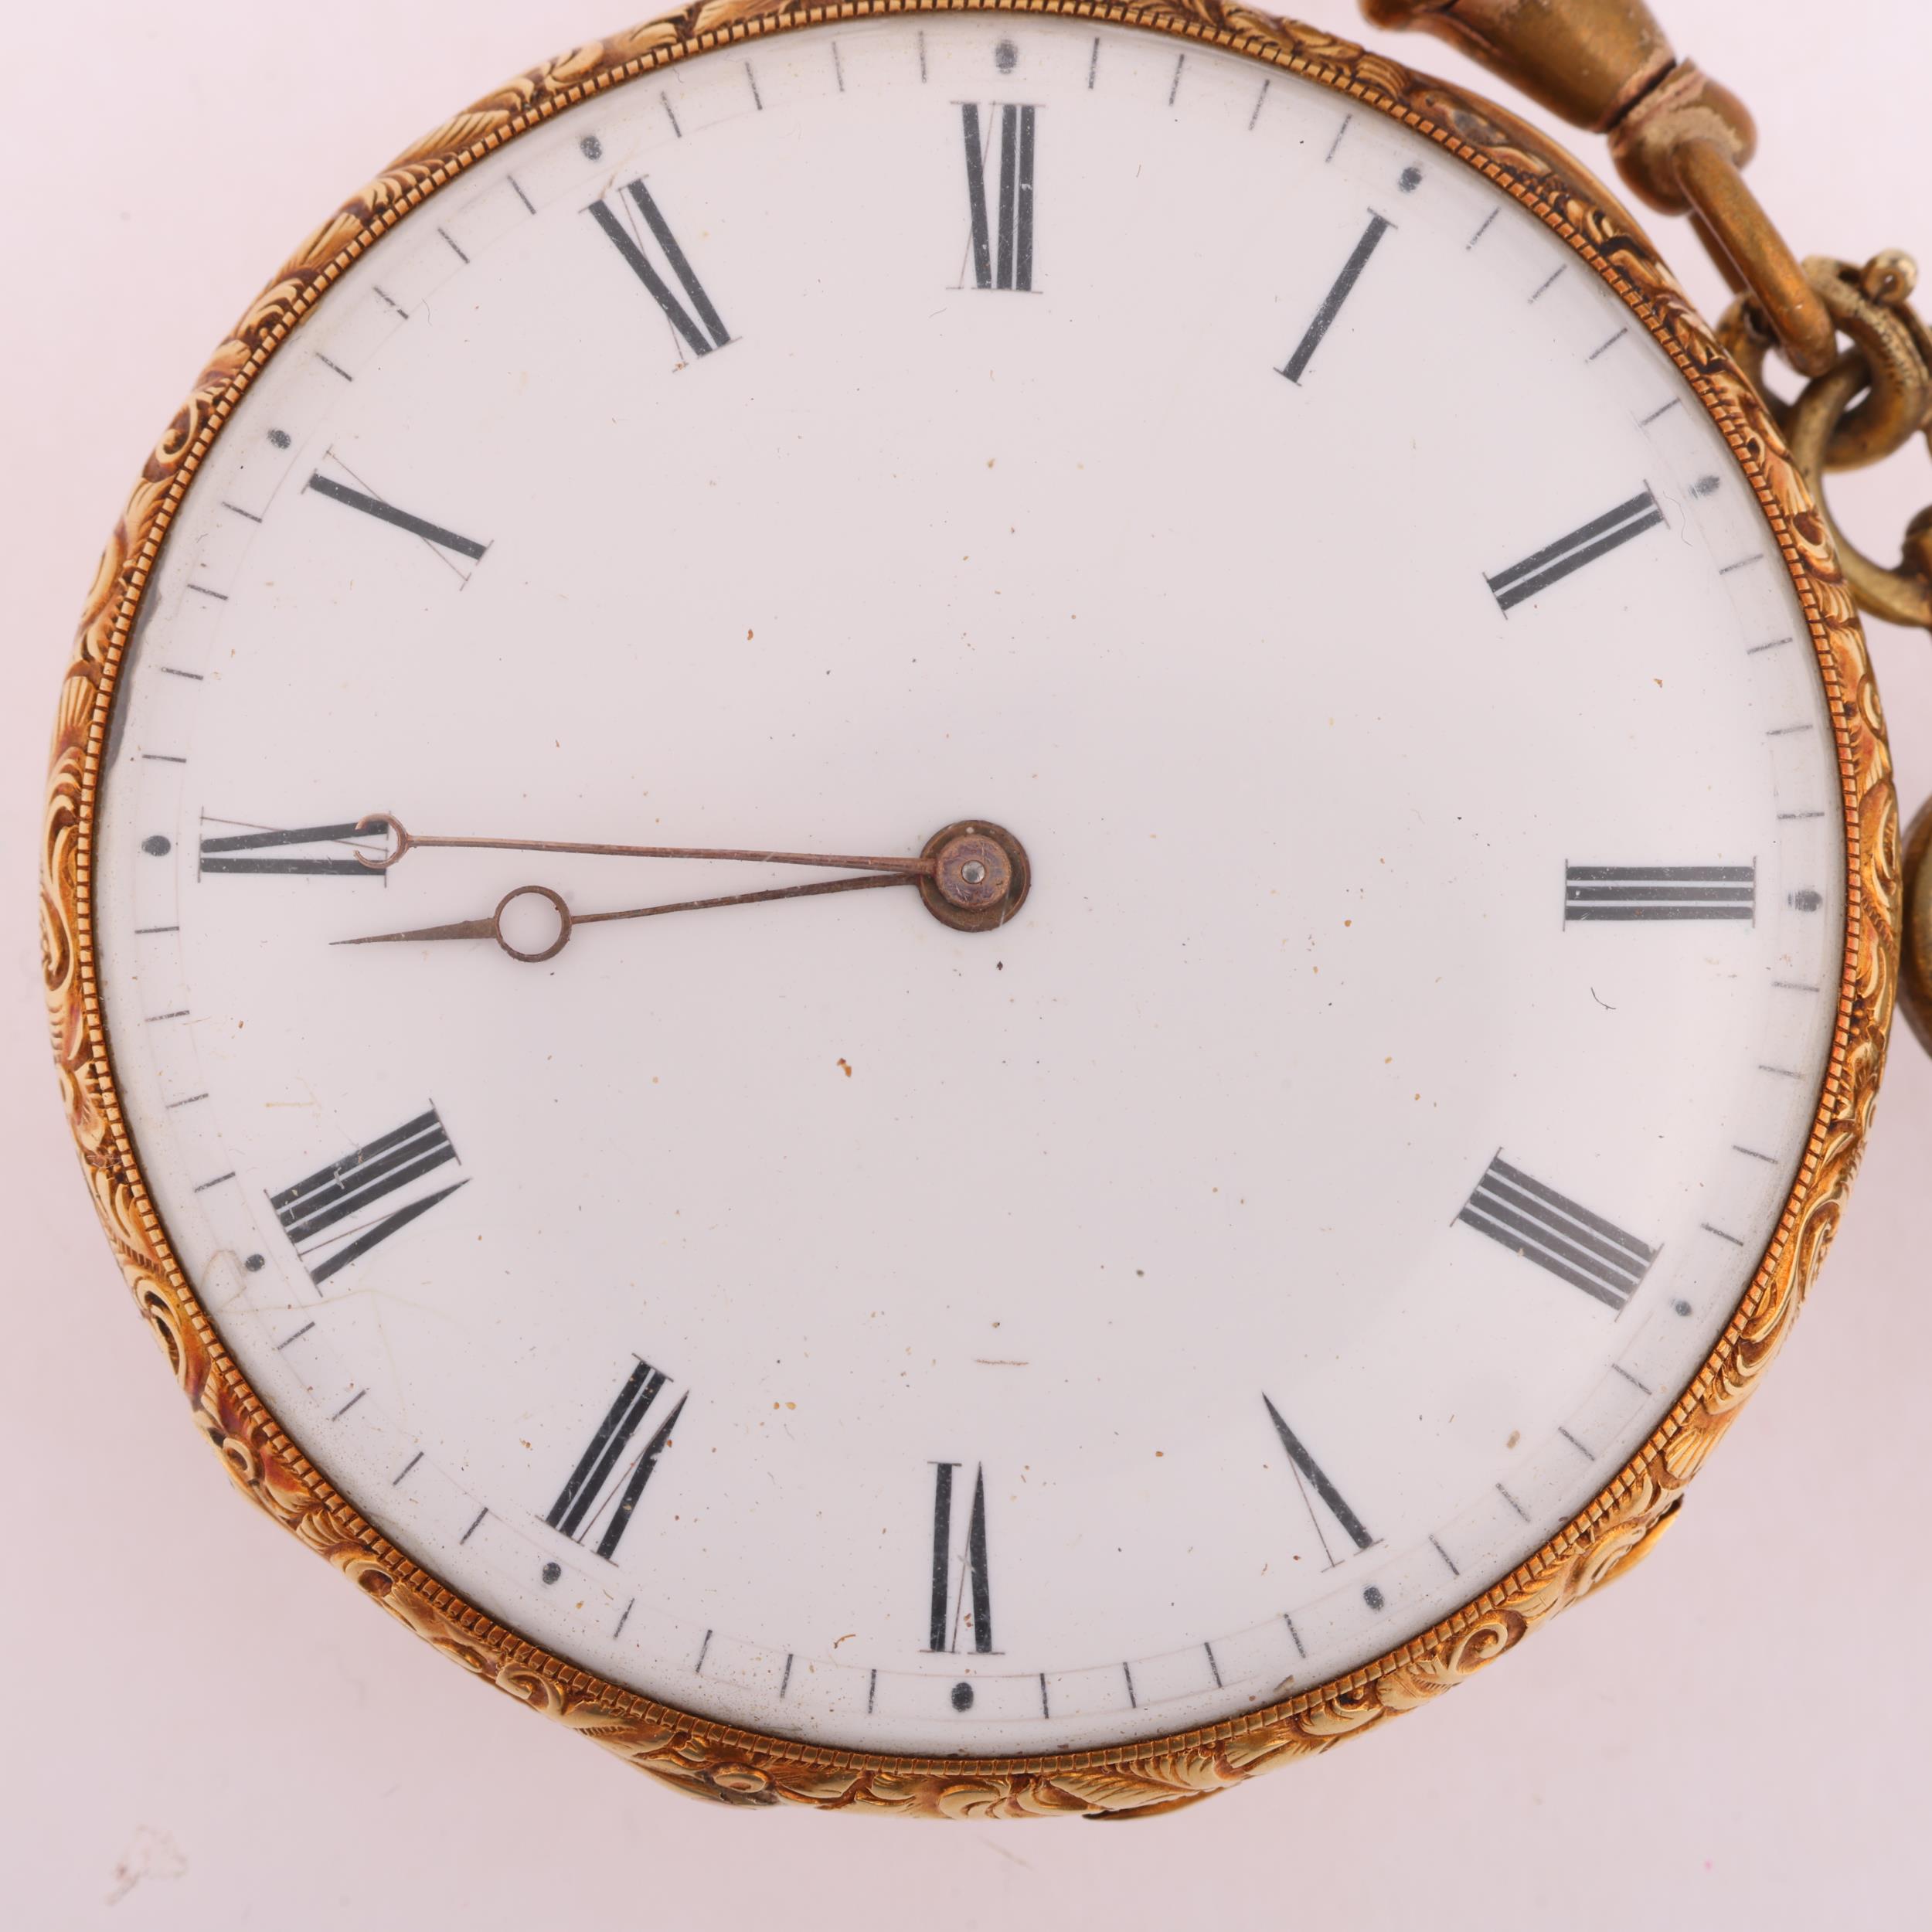 A 19th century open-face key-wind pocket watch, white enamel dial with Roman numeral hour markers, - Image 2 of 5